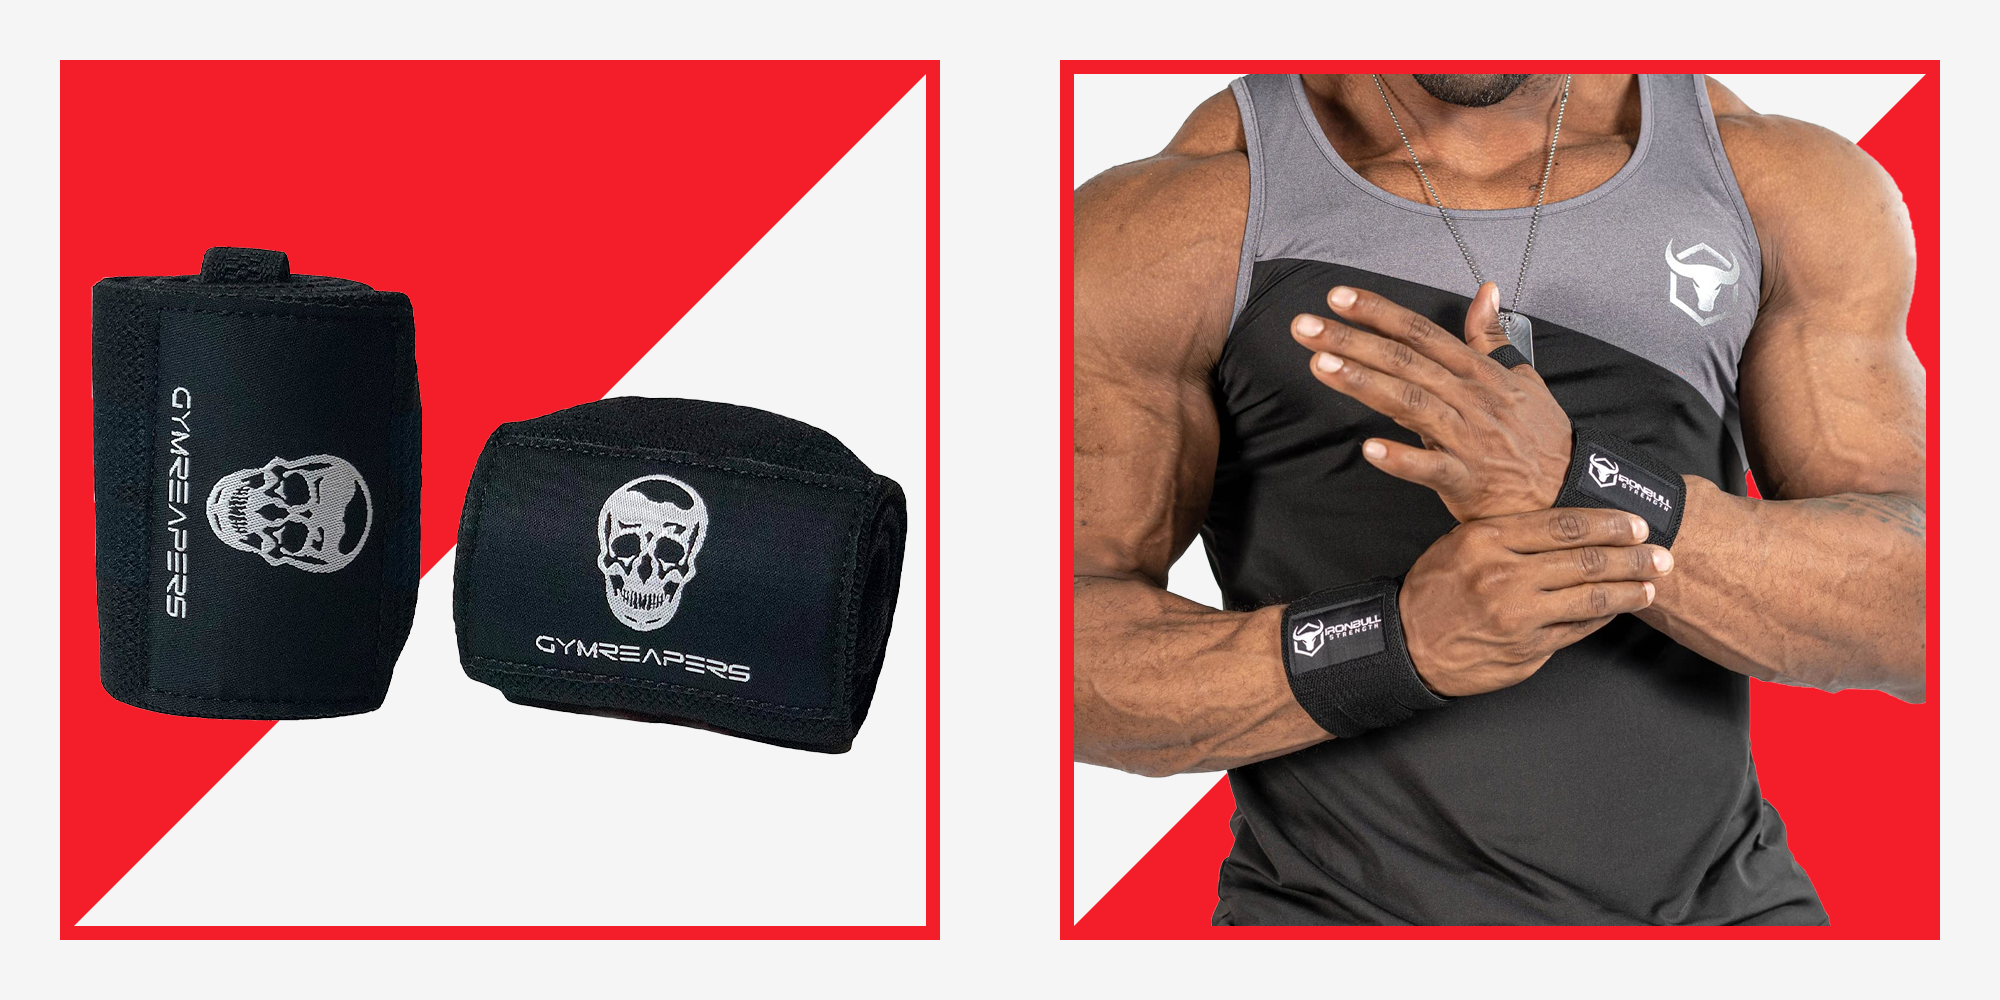 Gymreapers Wrist Wraps - 18 Weightlifting Wrist Support